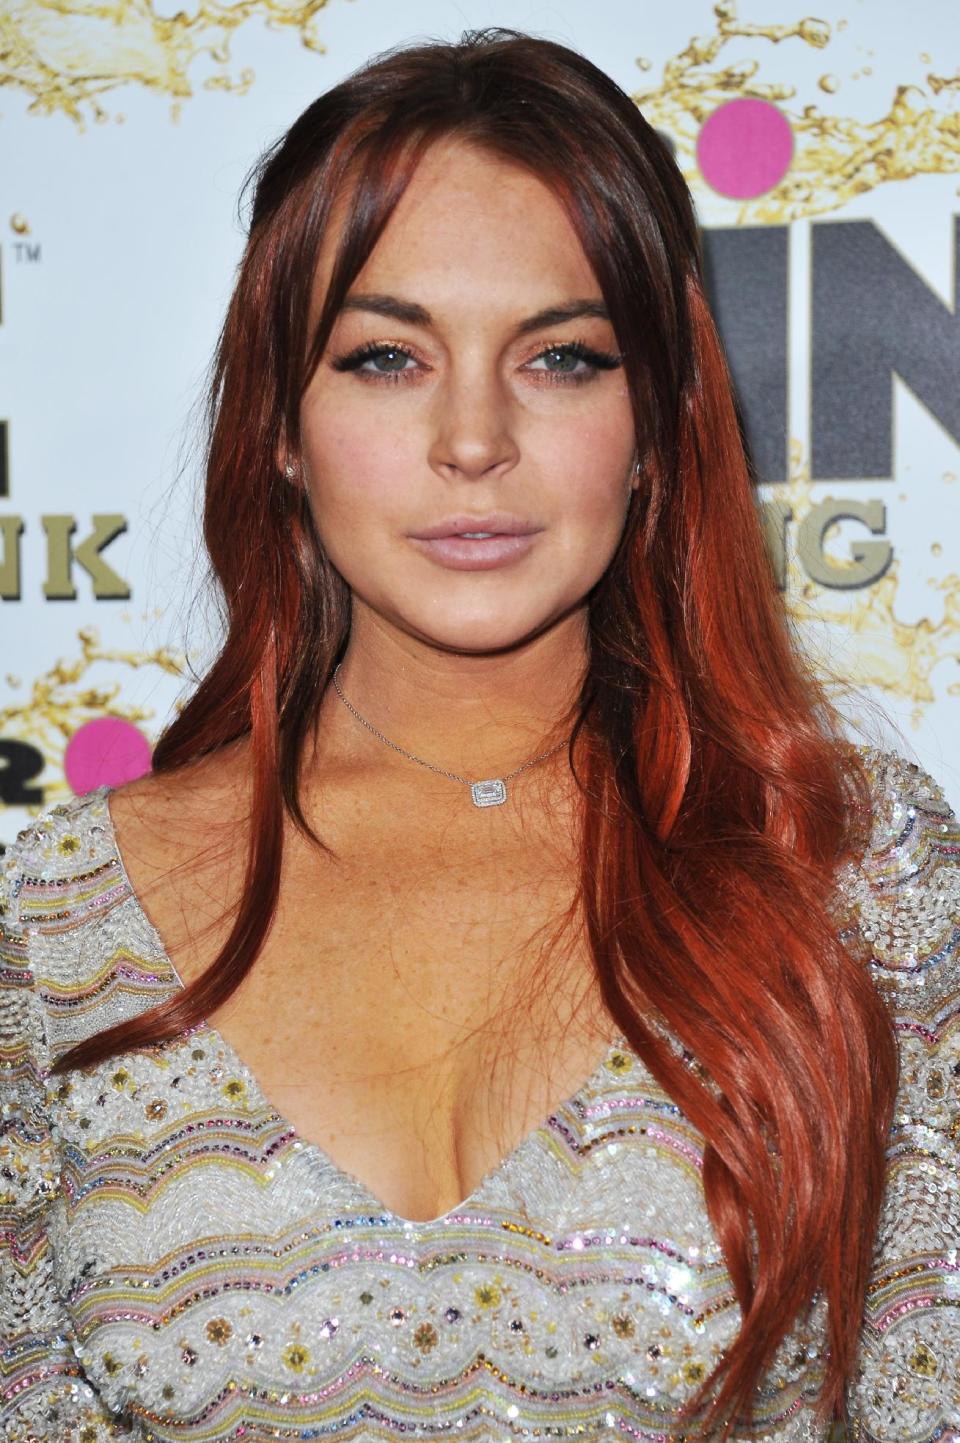 FILE - In this Oct. 11, 2012 file photo, Lindsay Lohan attends the Mr. Pink Ginseng launch party at the Beverly Wilshire hotel in Beverly Hills, Calif. Lohan is due to be arraigned on Wednesday, Dec. 12, 2012 on three misdemeanor charges filed after authorities say they determined the actress lied about being a passenger when her Porsche slammed into the back of a dump truck in June. (Photo by Richard Shotwell/Invision/AP, File)